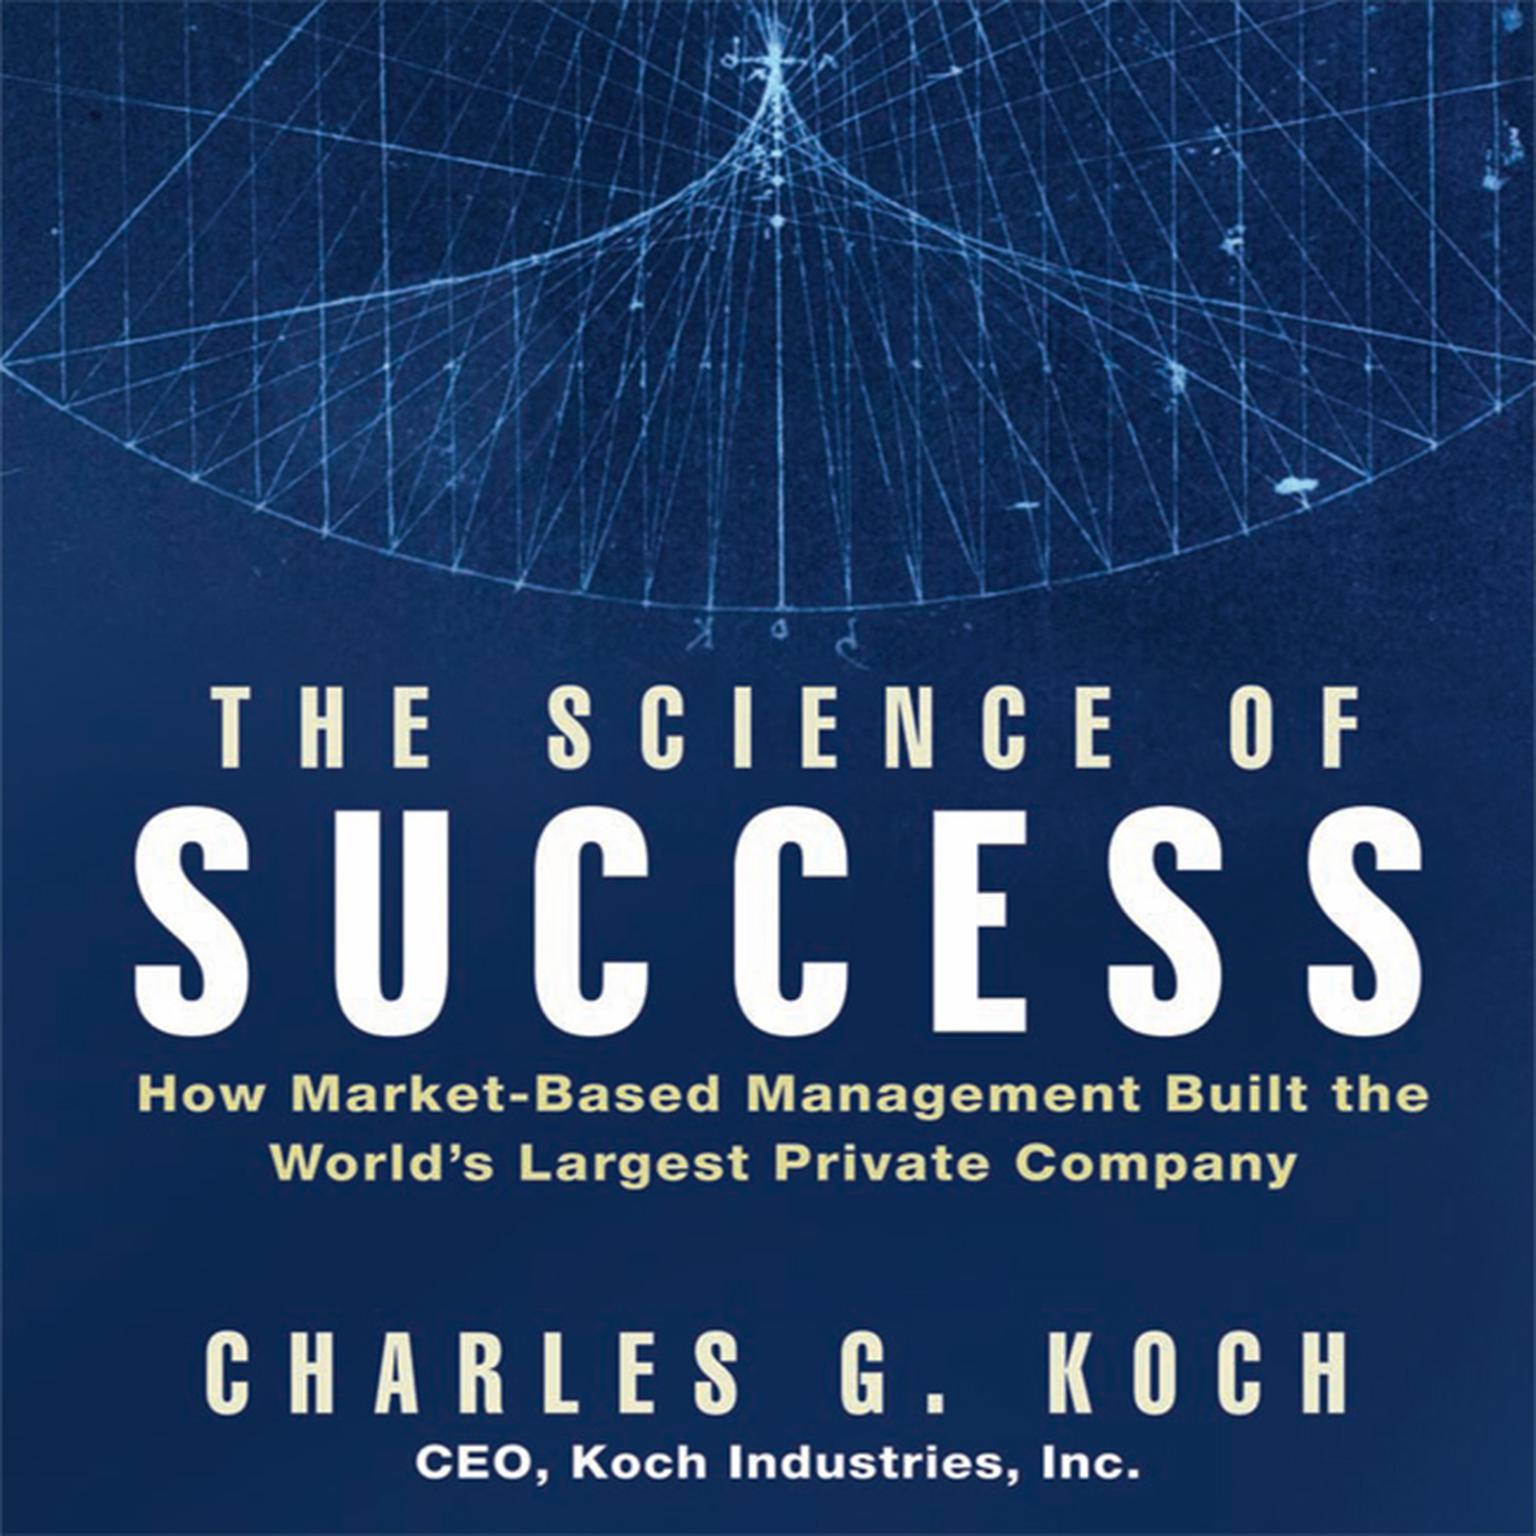 The Science Success: How Market-Based Management Built the Worlds Largest Private Company Audiobook, by Charles G. Koch